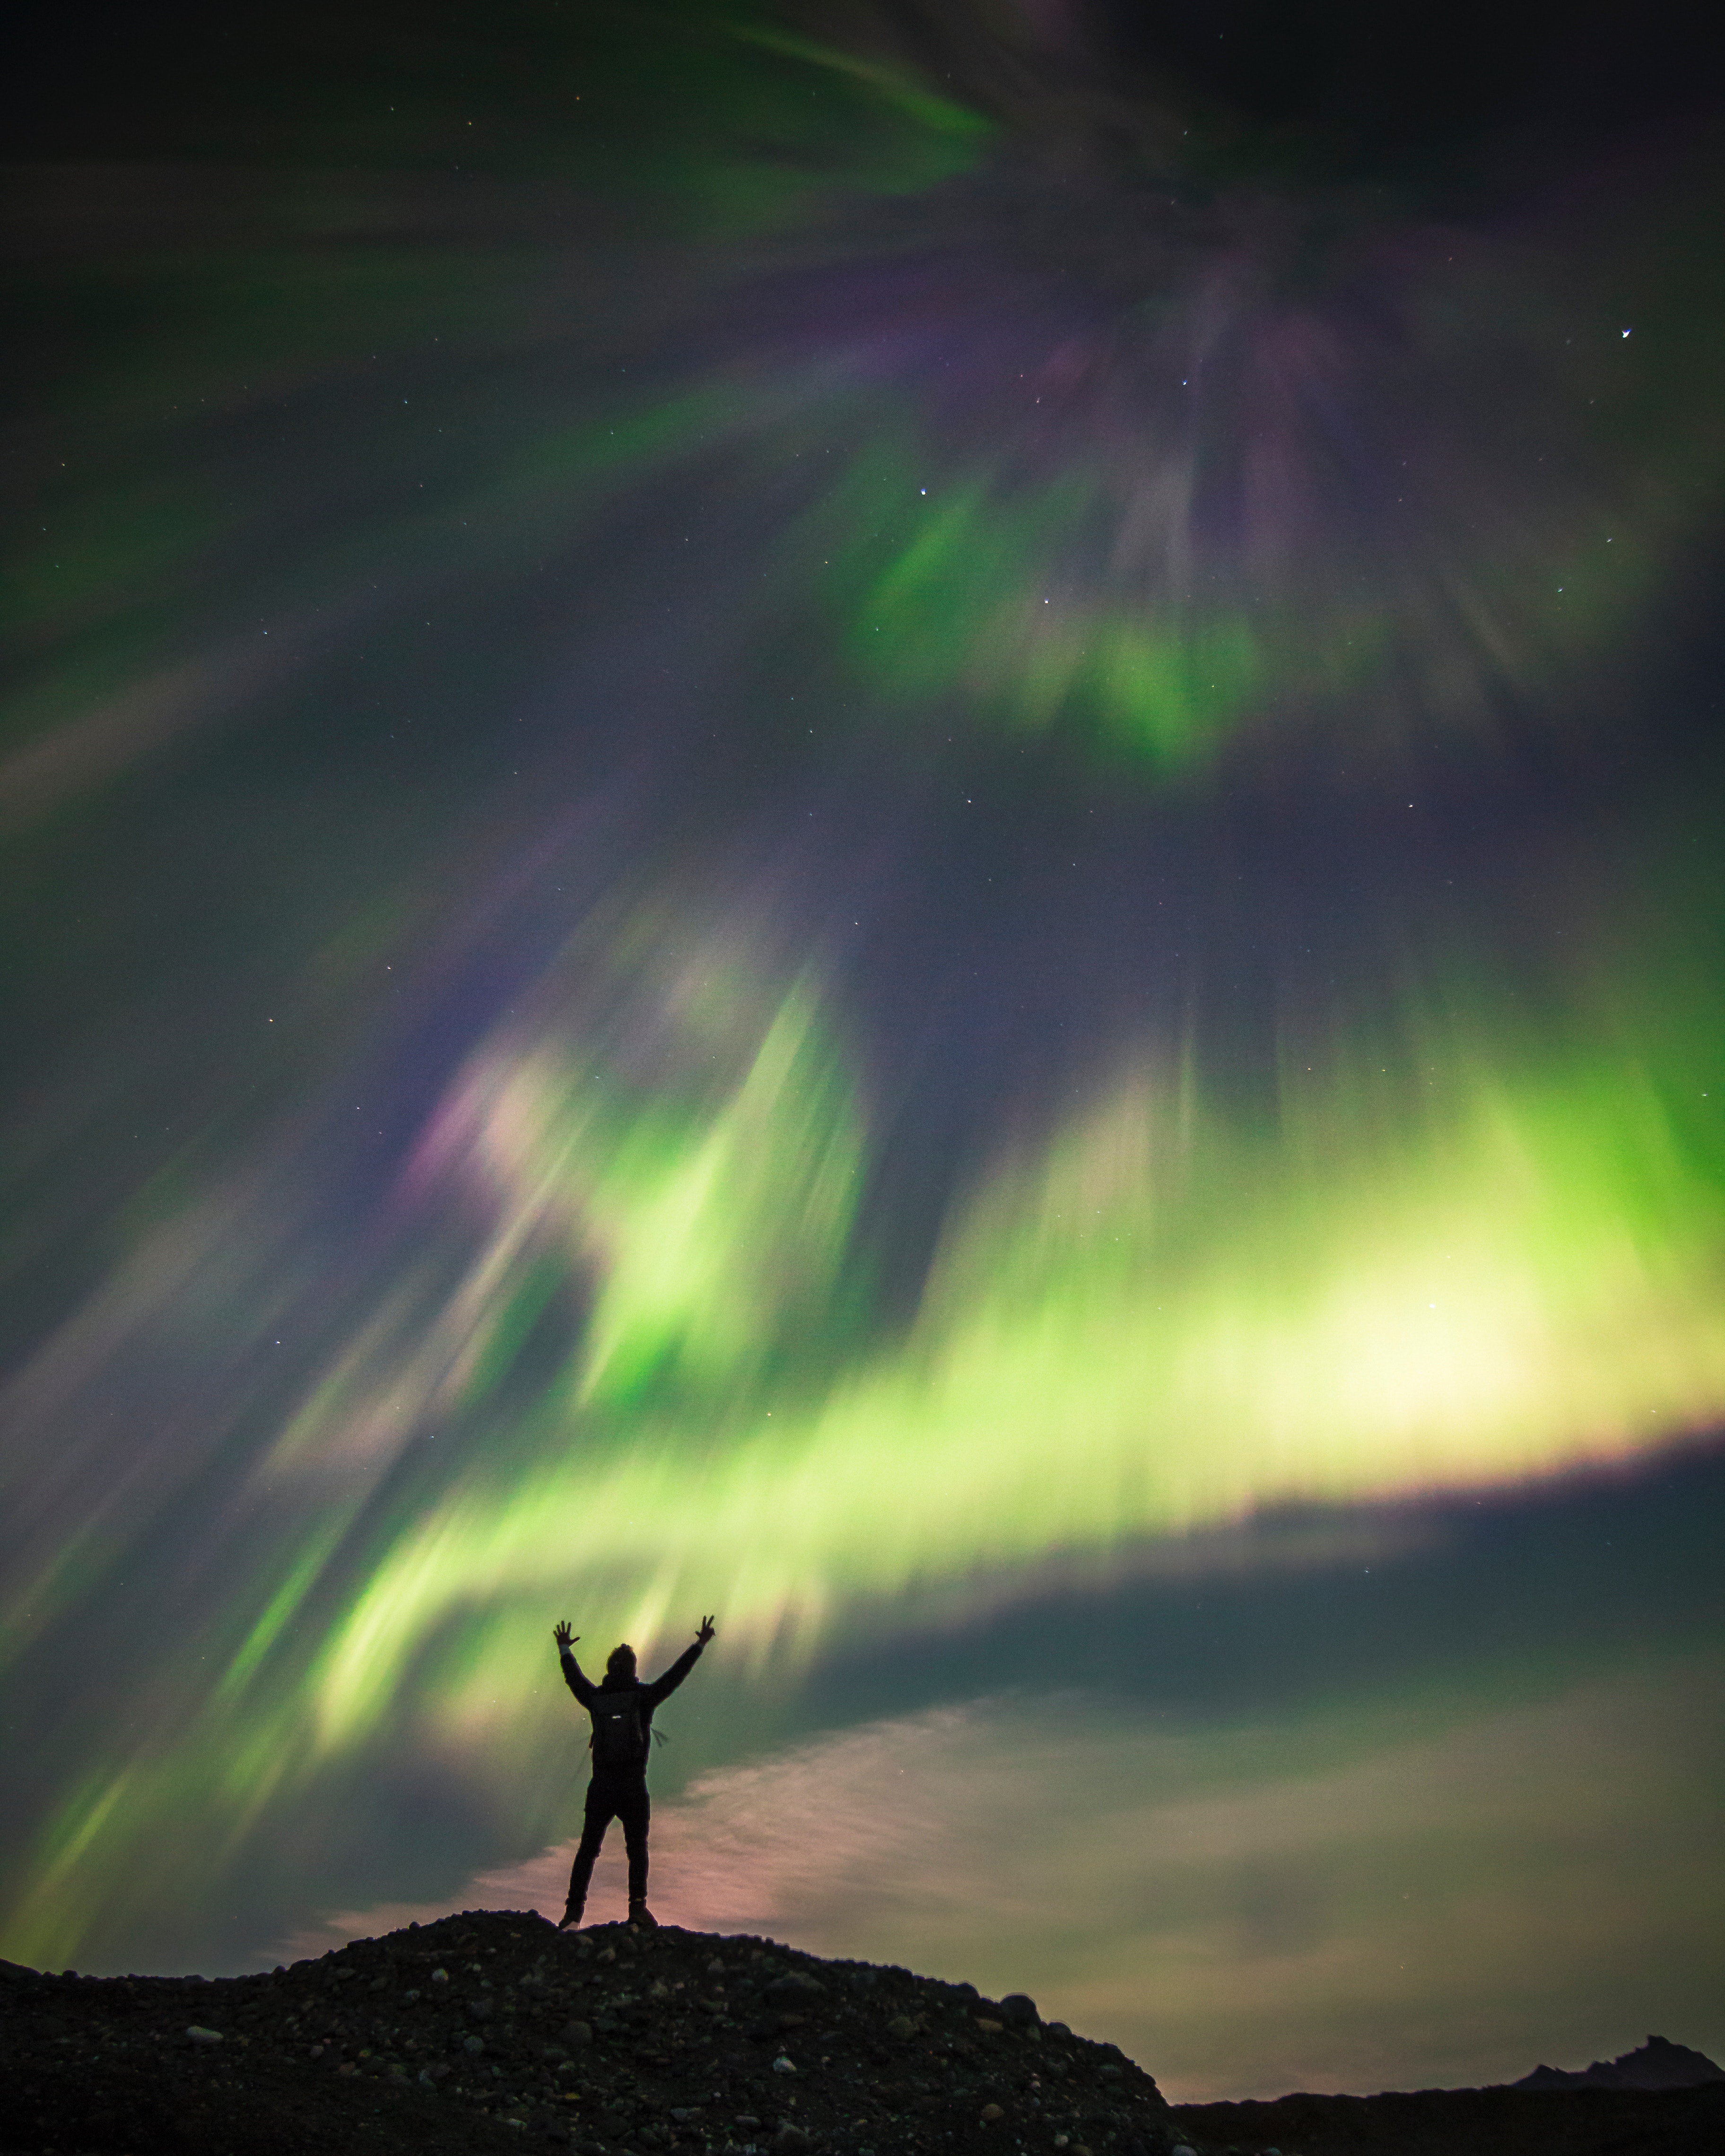 wallpapers privacy, dark, silhouette, seclusion, loneliness, northern lights, aurora borealis, aurora